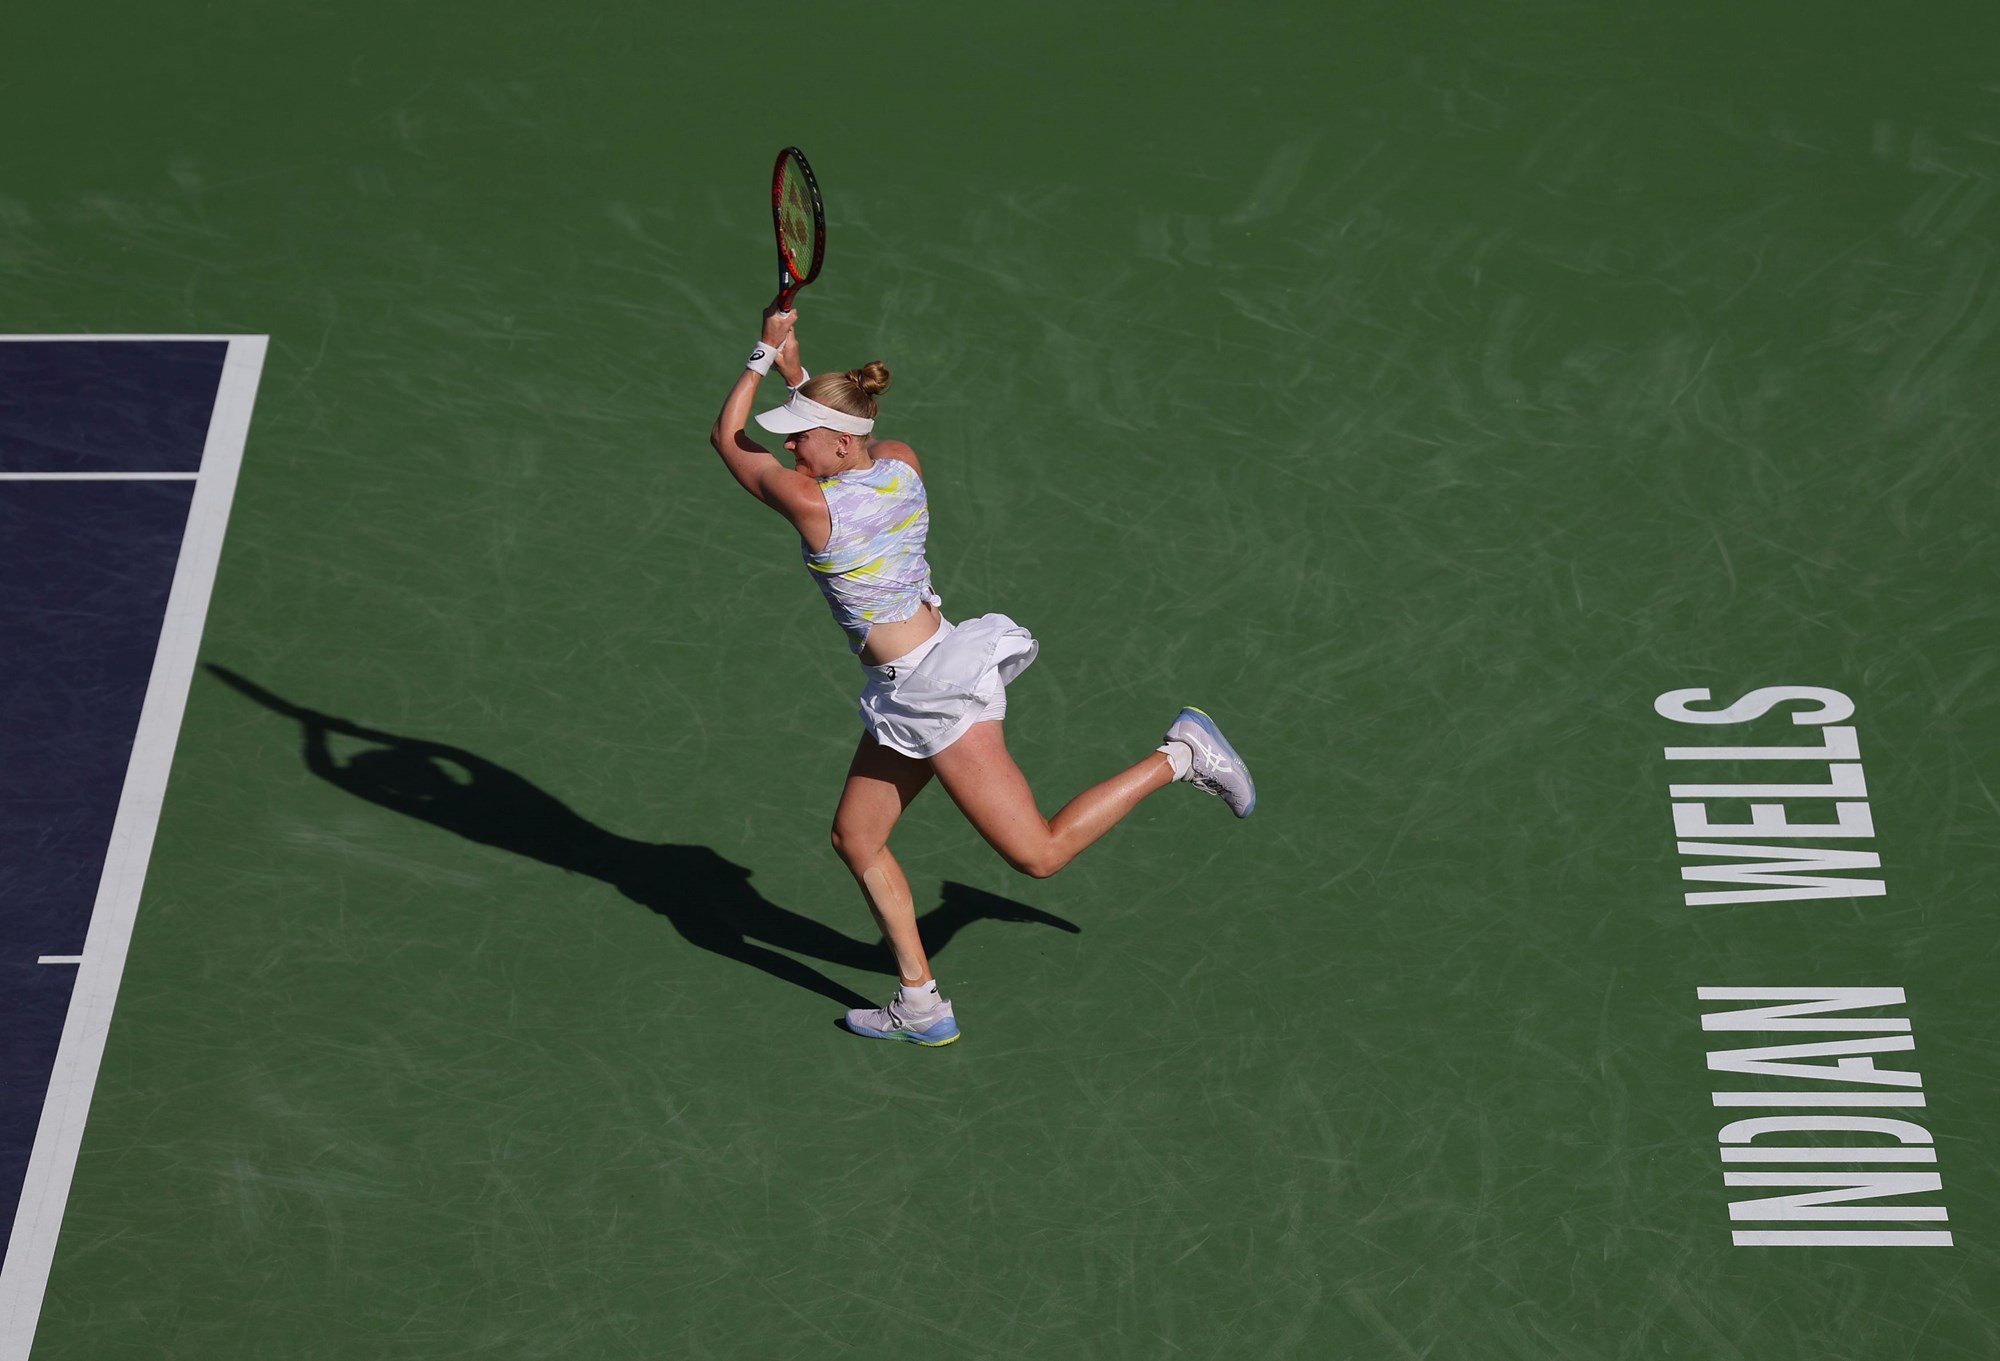 Harriet Dart driving a backhand against Madison Keys at Indian Wells 2022